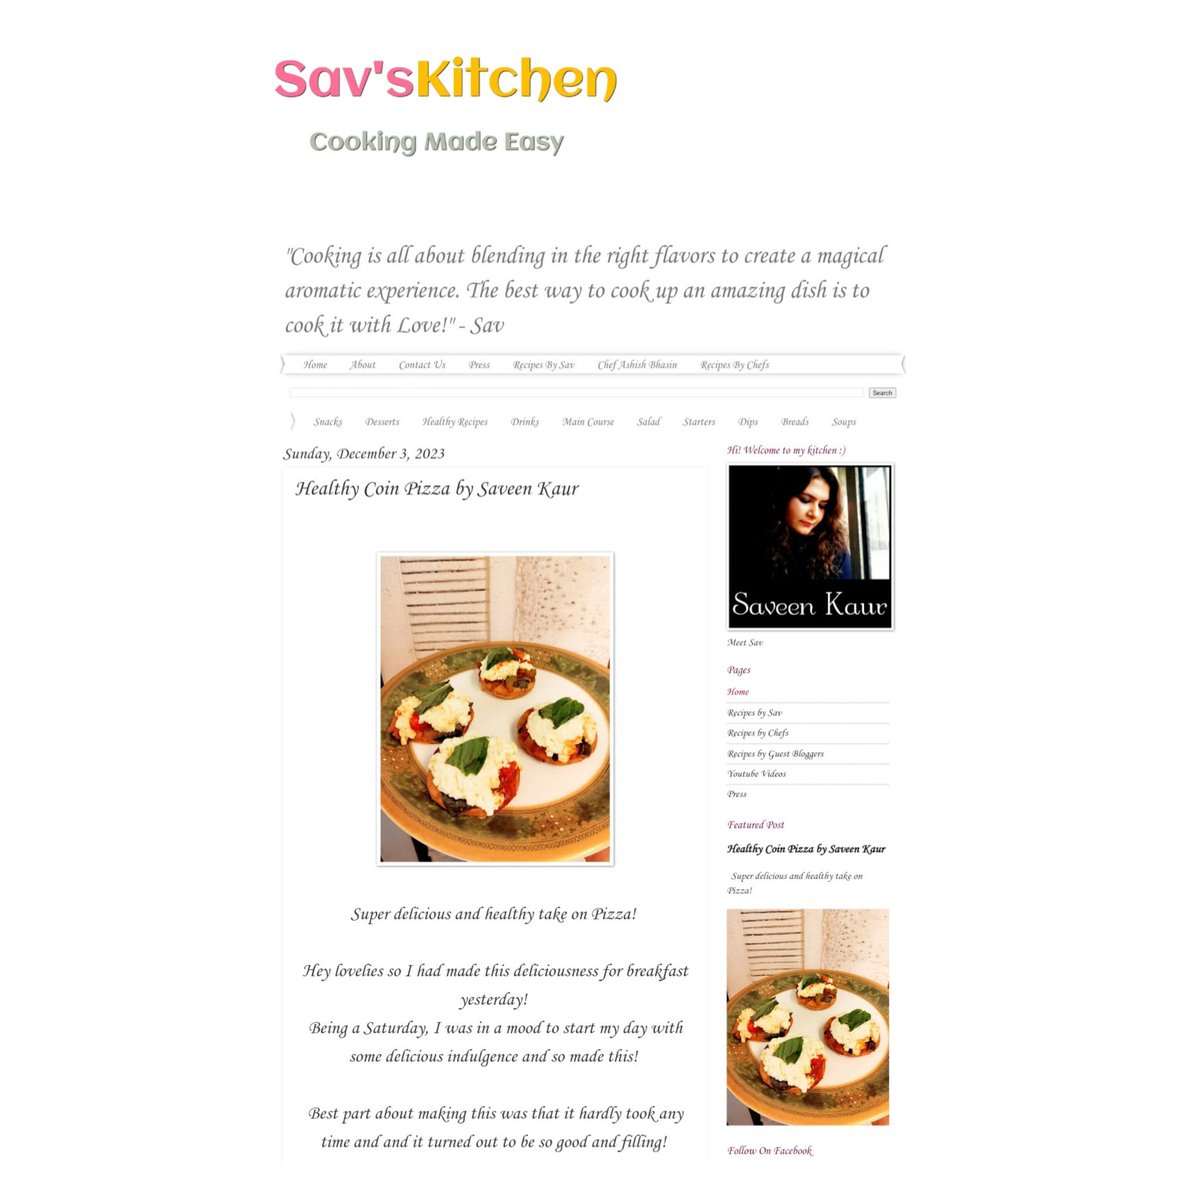 #NewRecipeAlert on 'savskitchen.com' 😊

Hello Monday with this delicious Healthy Coin Pizza Recipe now live on 'savskitchen.com'
Super easy to make and so delicious 🤤

Check it out 😁
.

#saveenkaur #savfooddiary #savskitchen #CookingMadeEasy #pizza #healthy